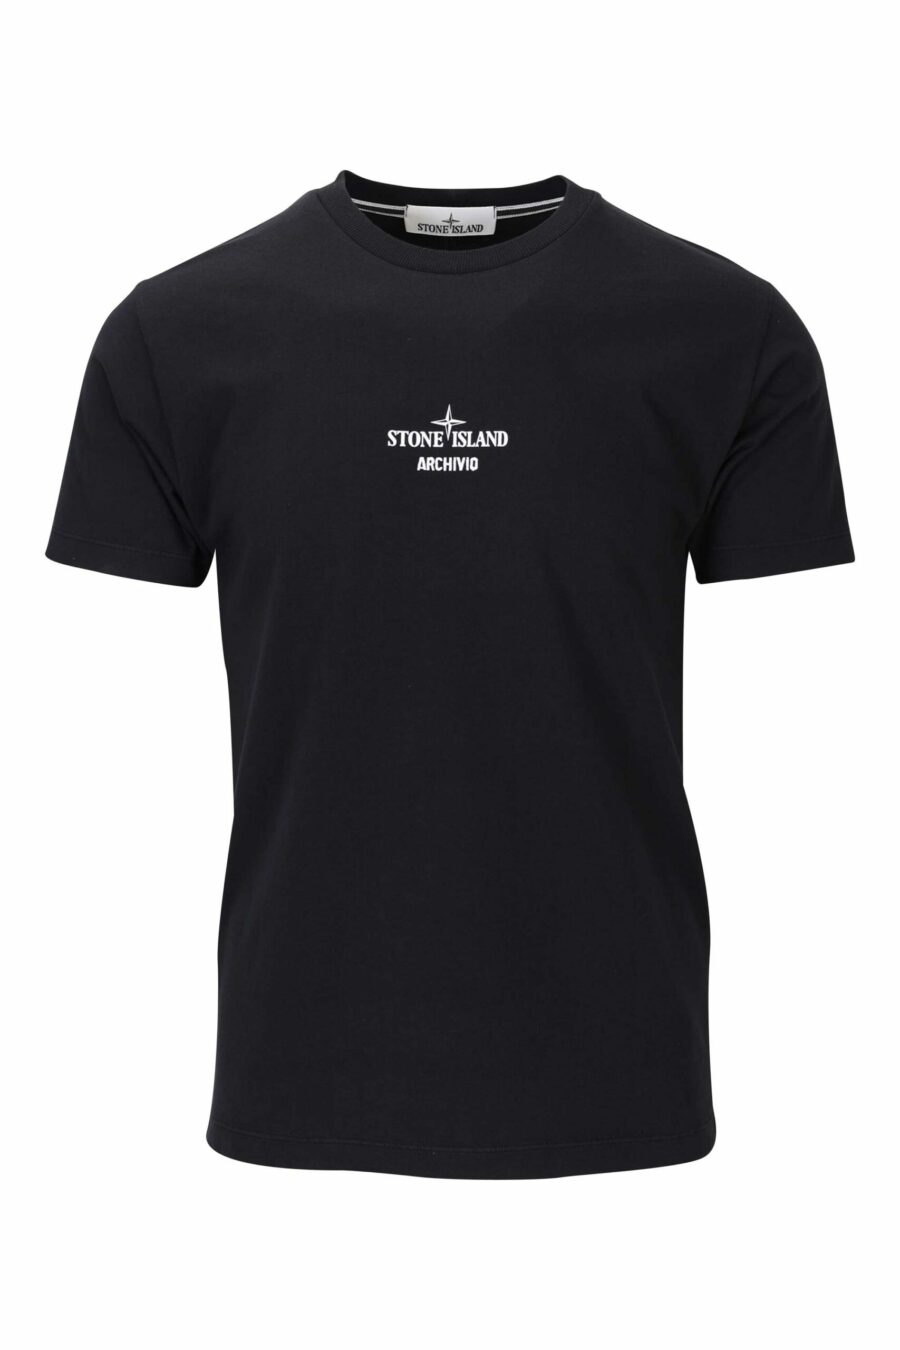 Black T-shirt with centred logo and print on the back - 8052572755927 scaled